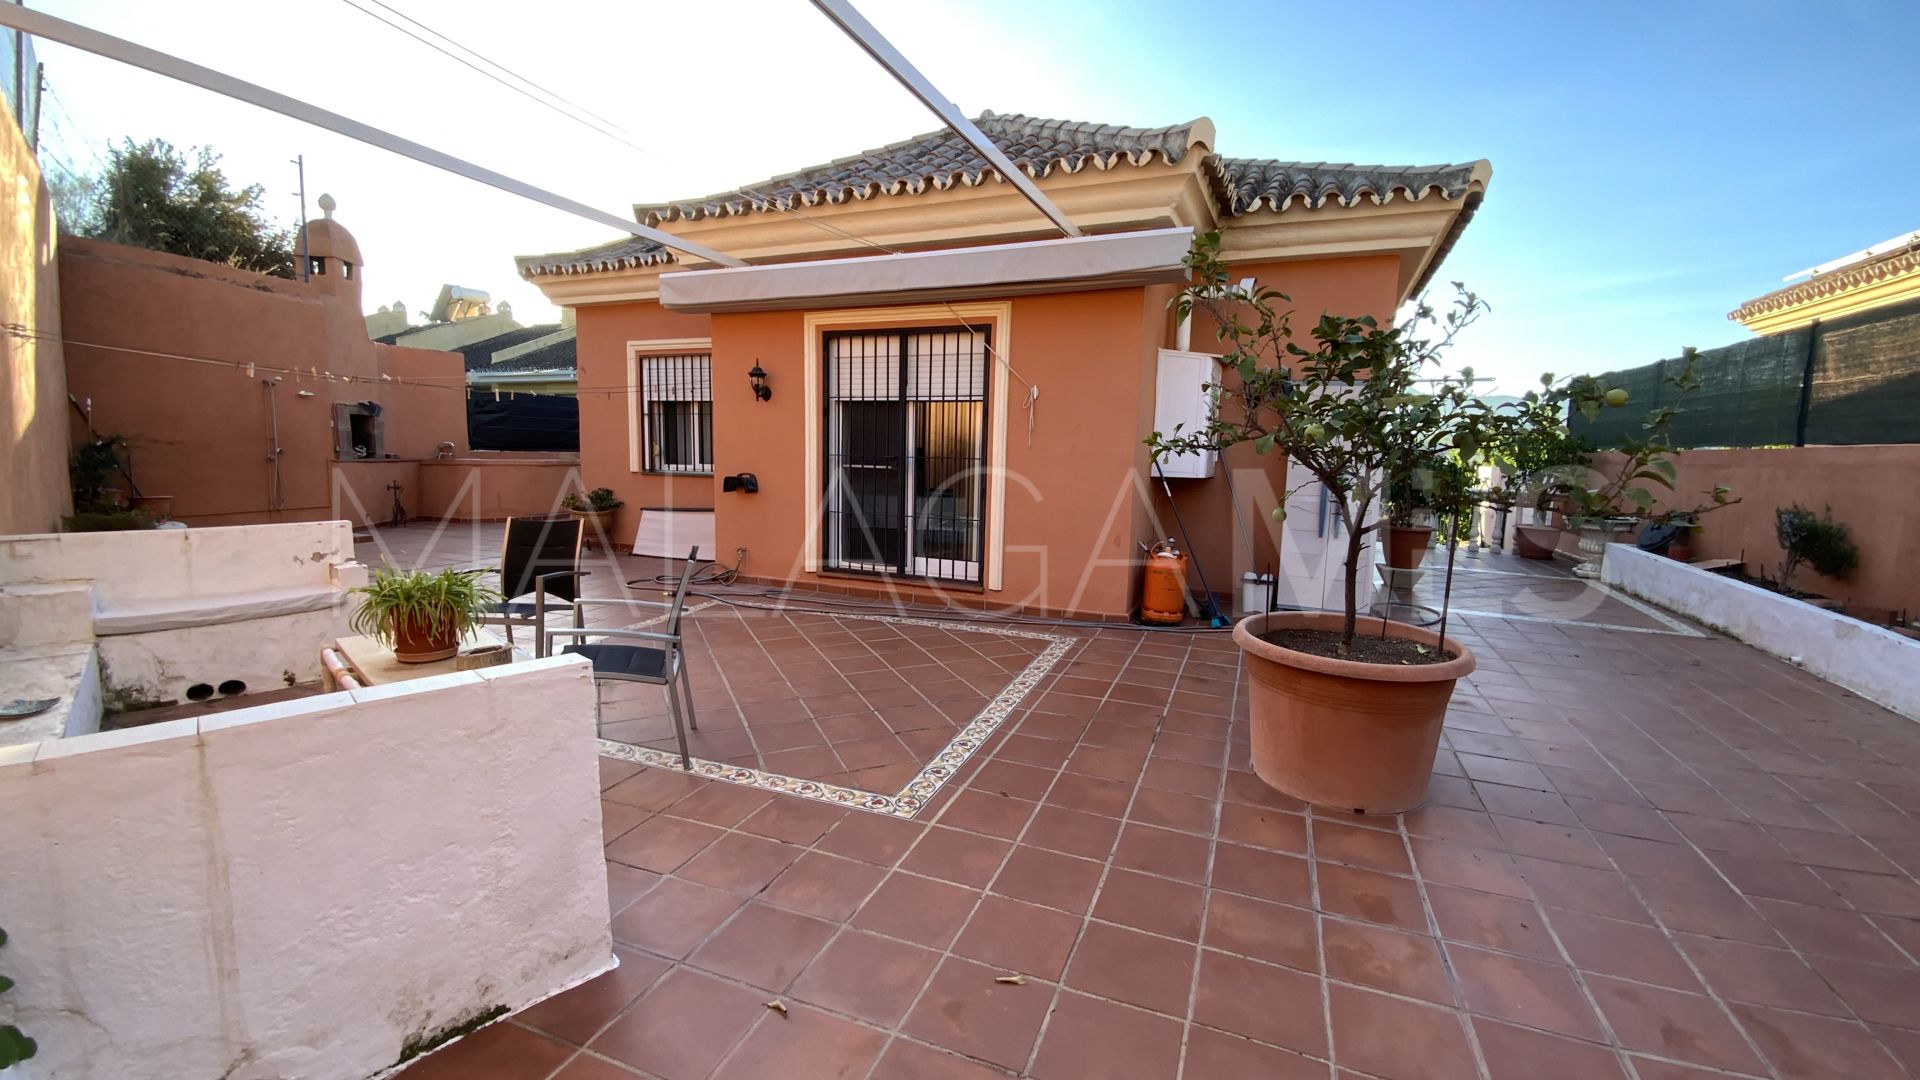 El Gamonal, chalet with 4 bedrooms for sale